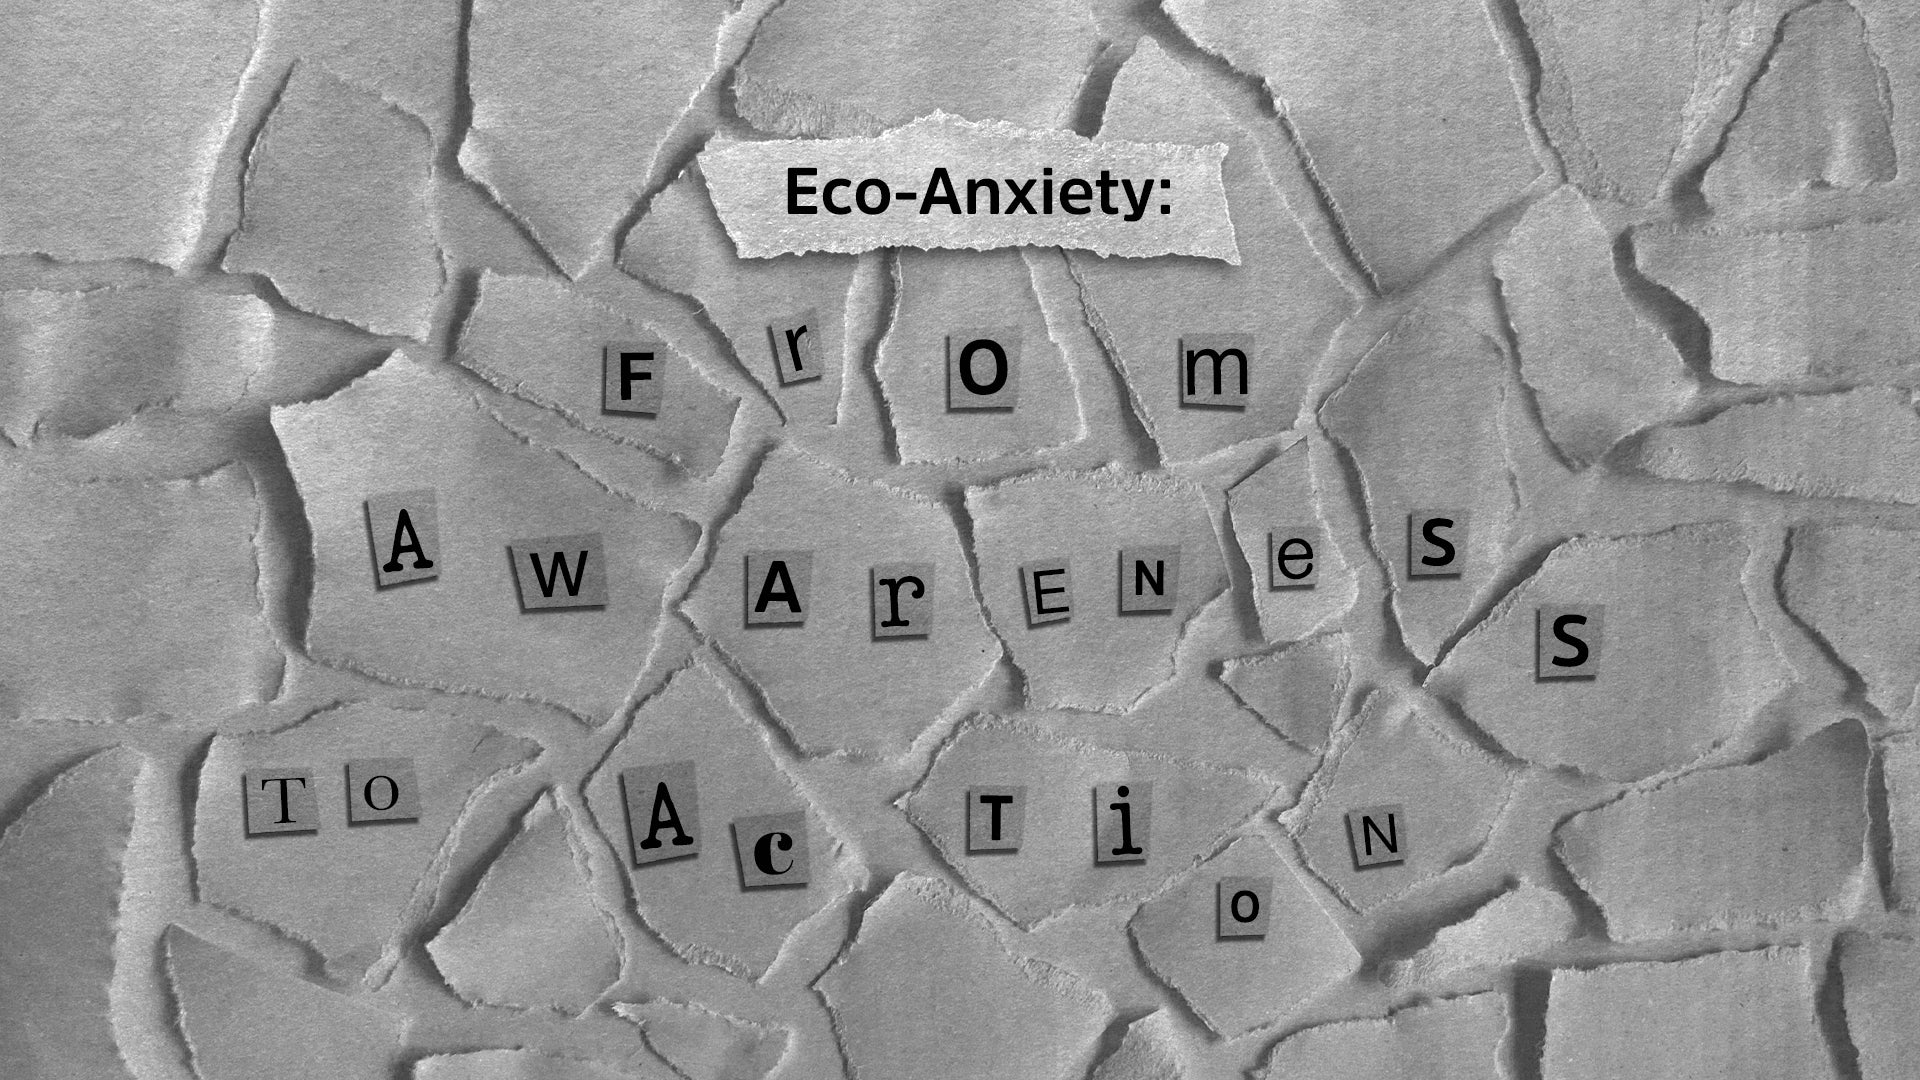 ECO-ANXIETY: FROM AWARENESS TO ACTION